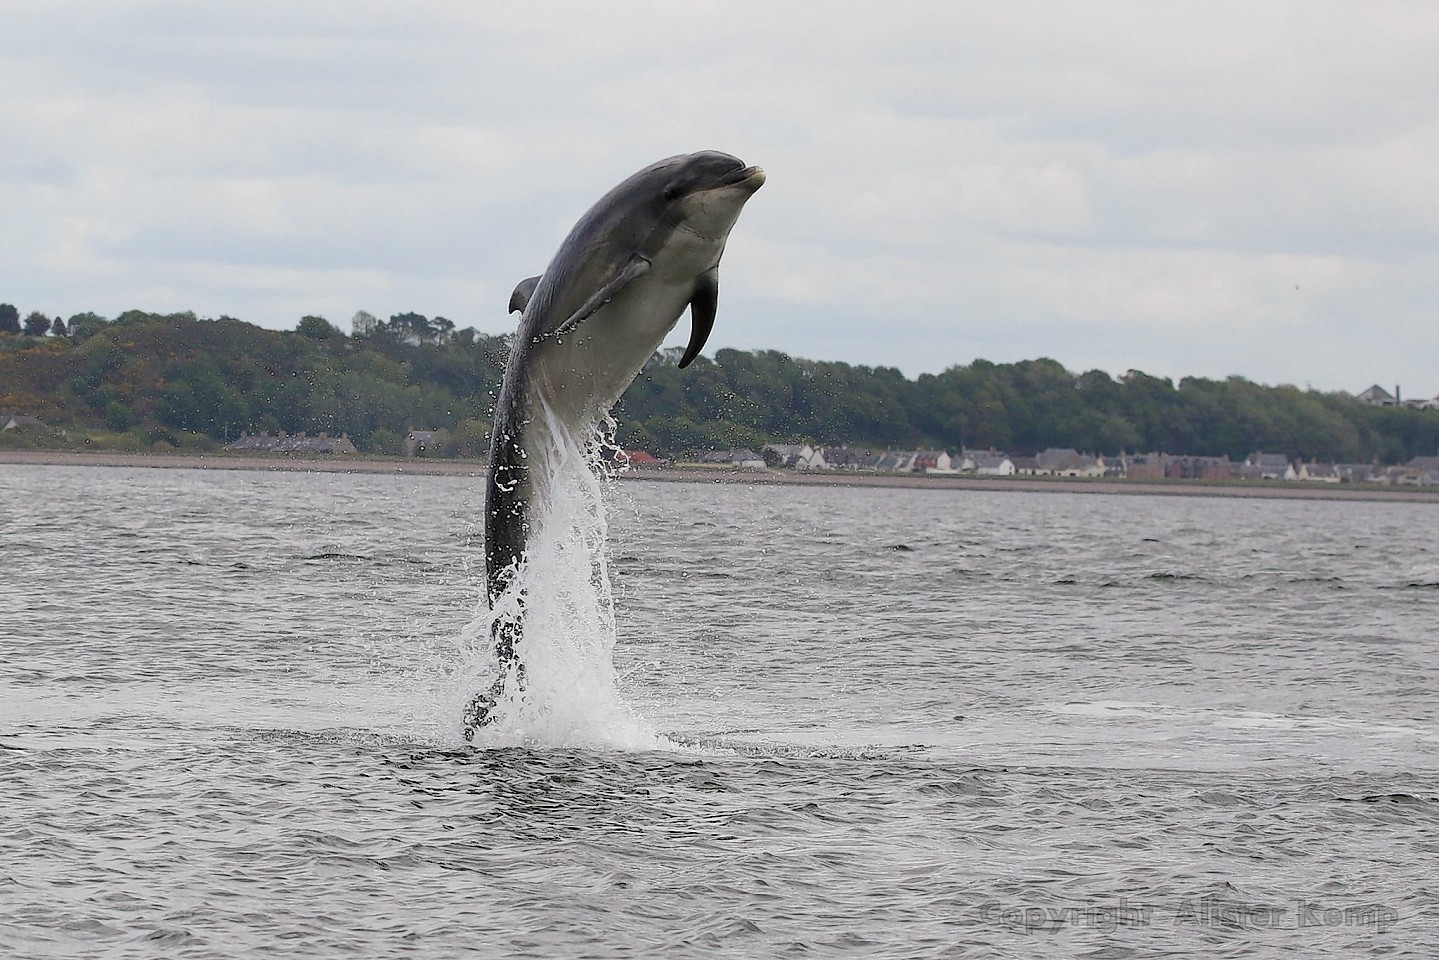 A dolphin leaping out of the Moray Firth at Chanonry Point. Pictures by Alister Kemp of Evanton